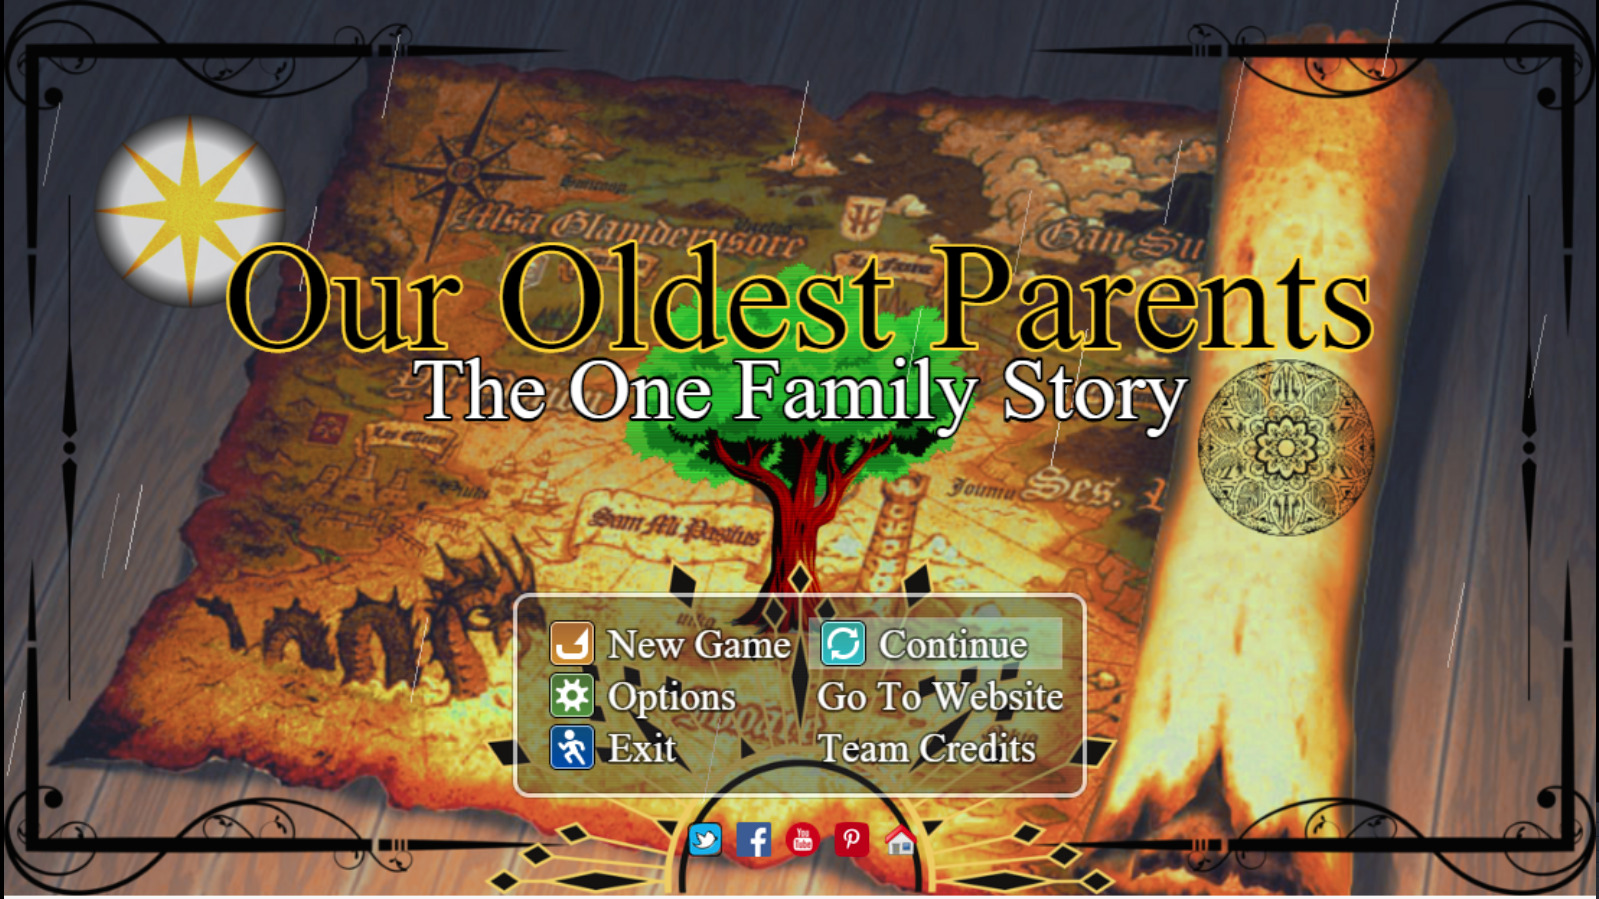 Our Oldest Parents: The One Family Story